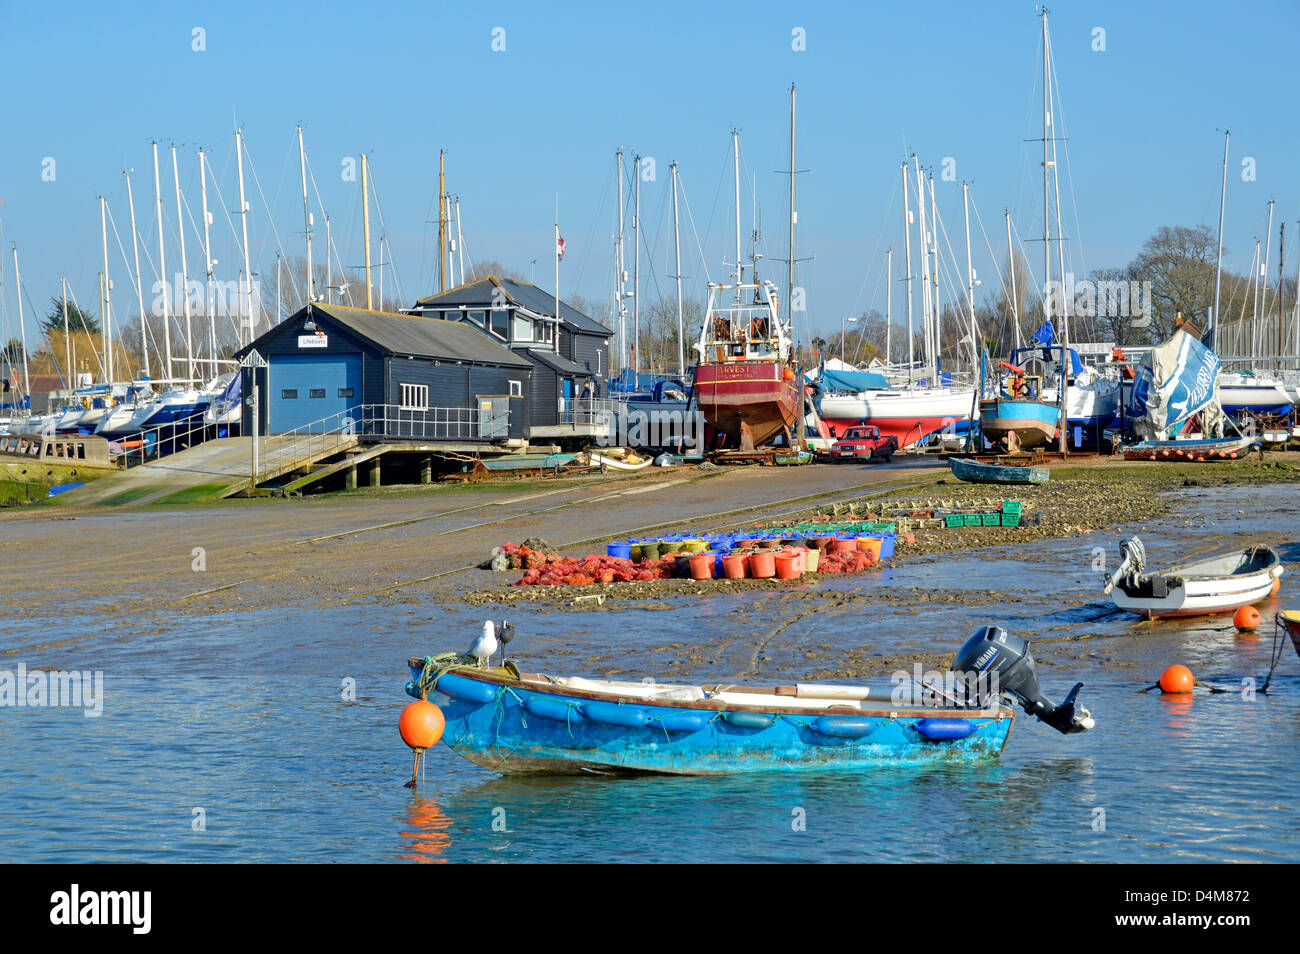 West Mersea lifeboat station buildings and boat yards landscape along the River Blackwater waterfront Mersea Island near Colchester Essex England UK Stock Photo